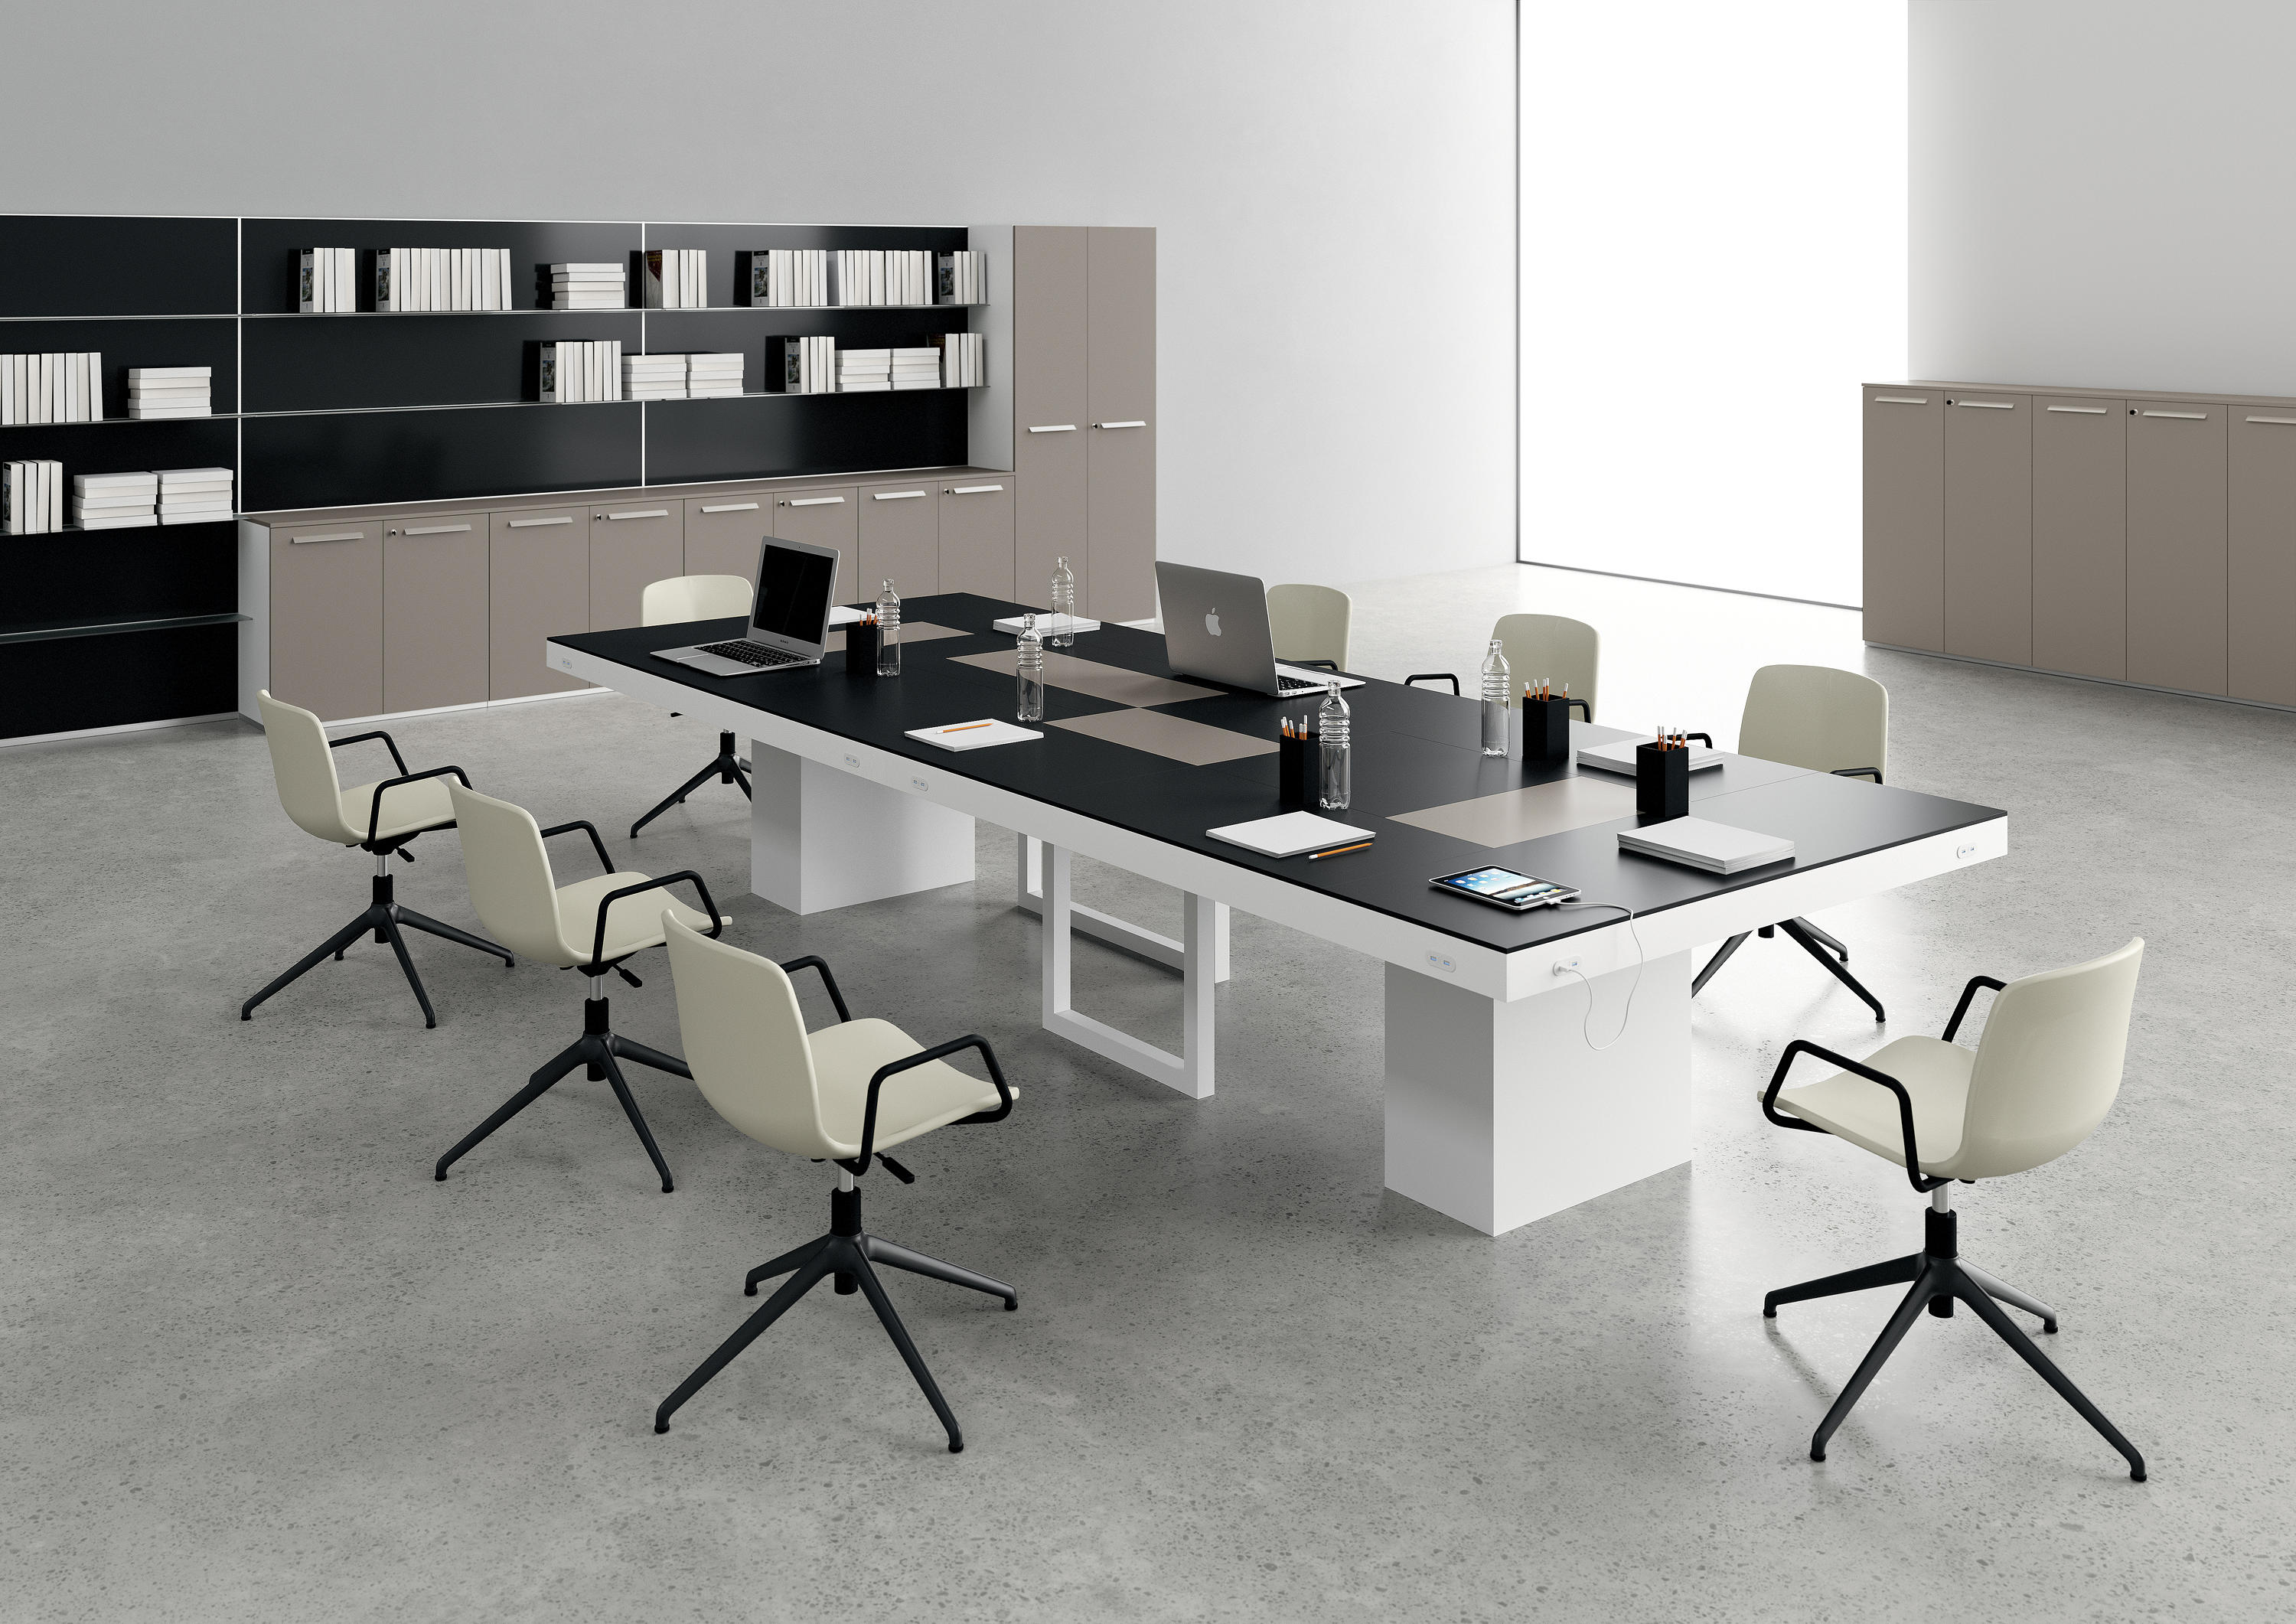 SPECIAL_TABLES - Contract tables from DVO | Architonic